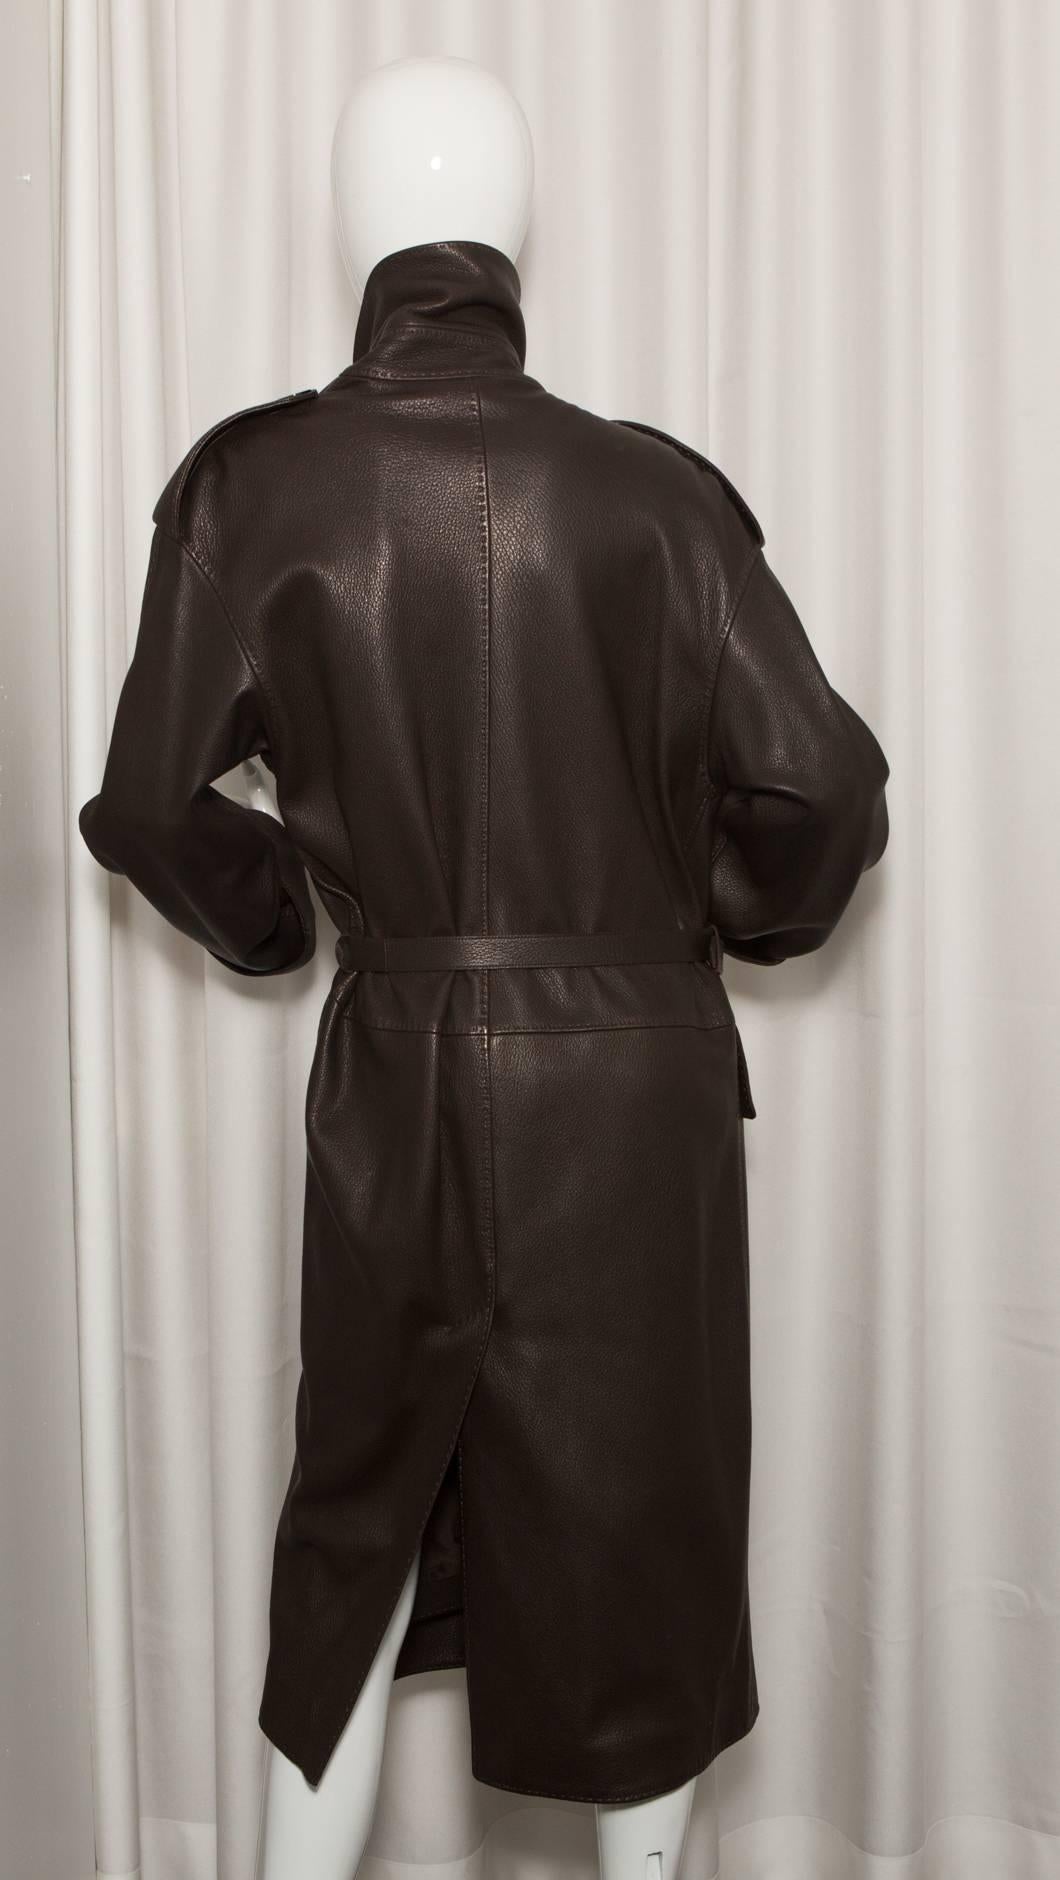 Dark brown leather trench coat with belt.
